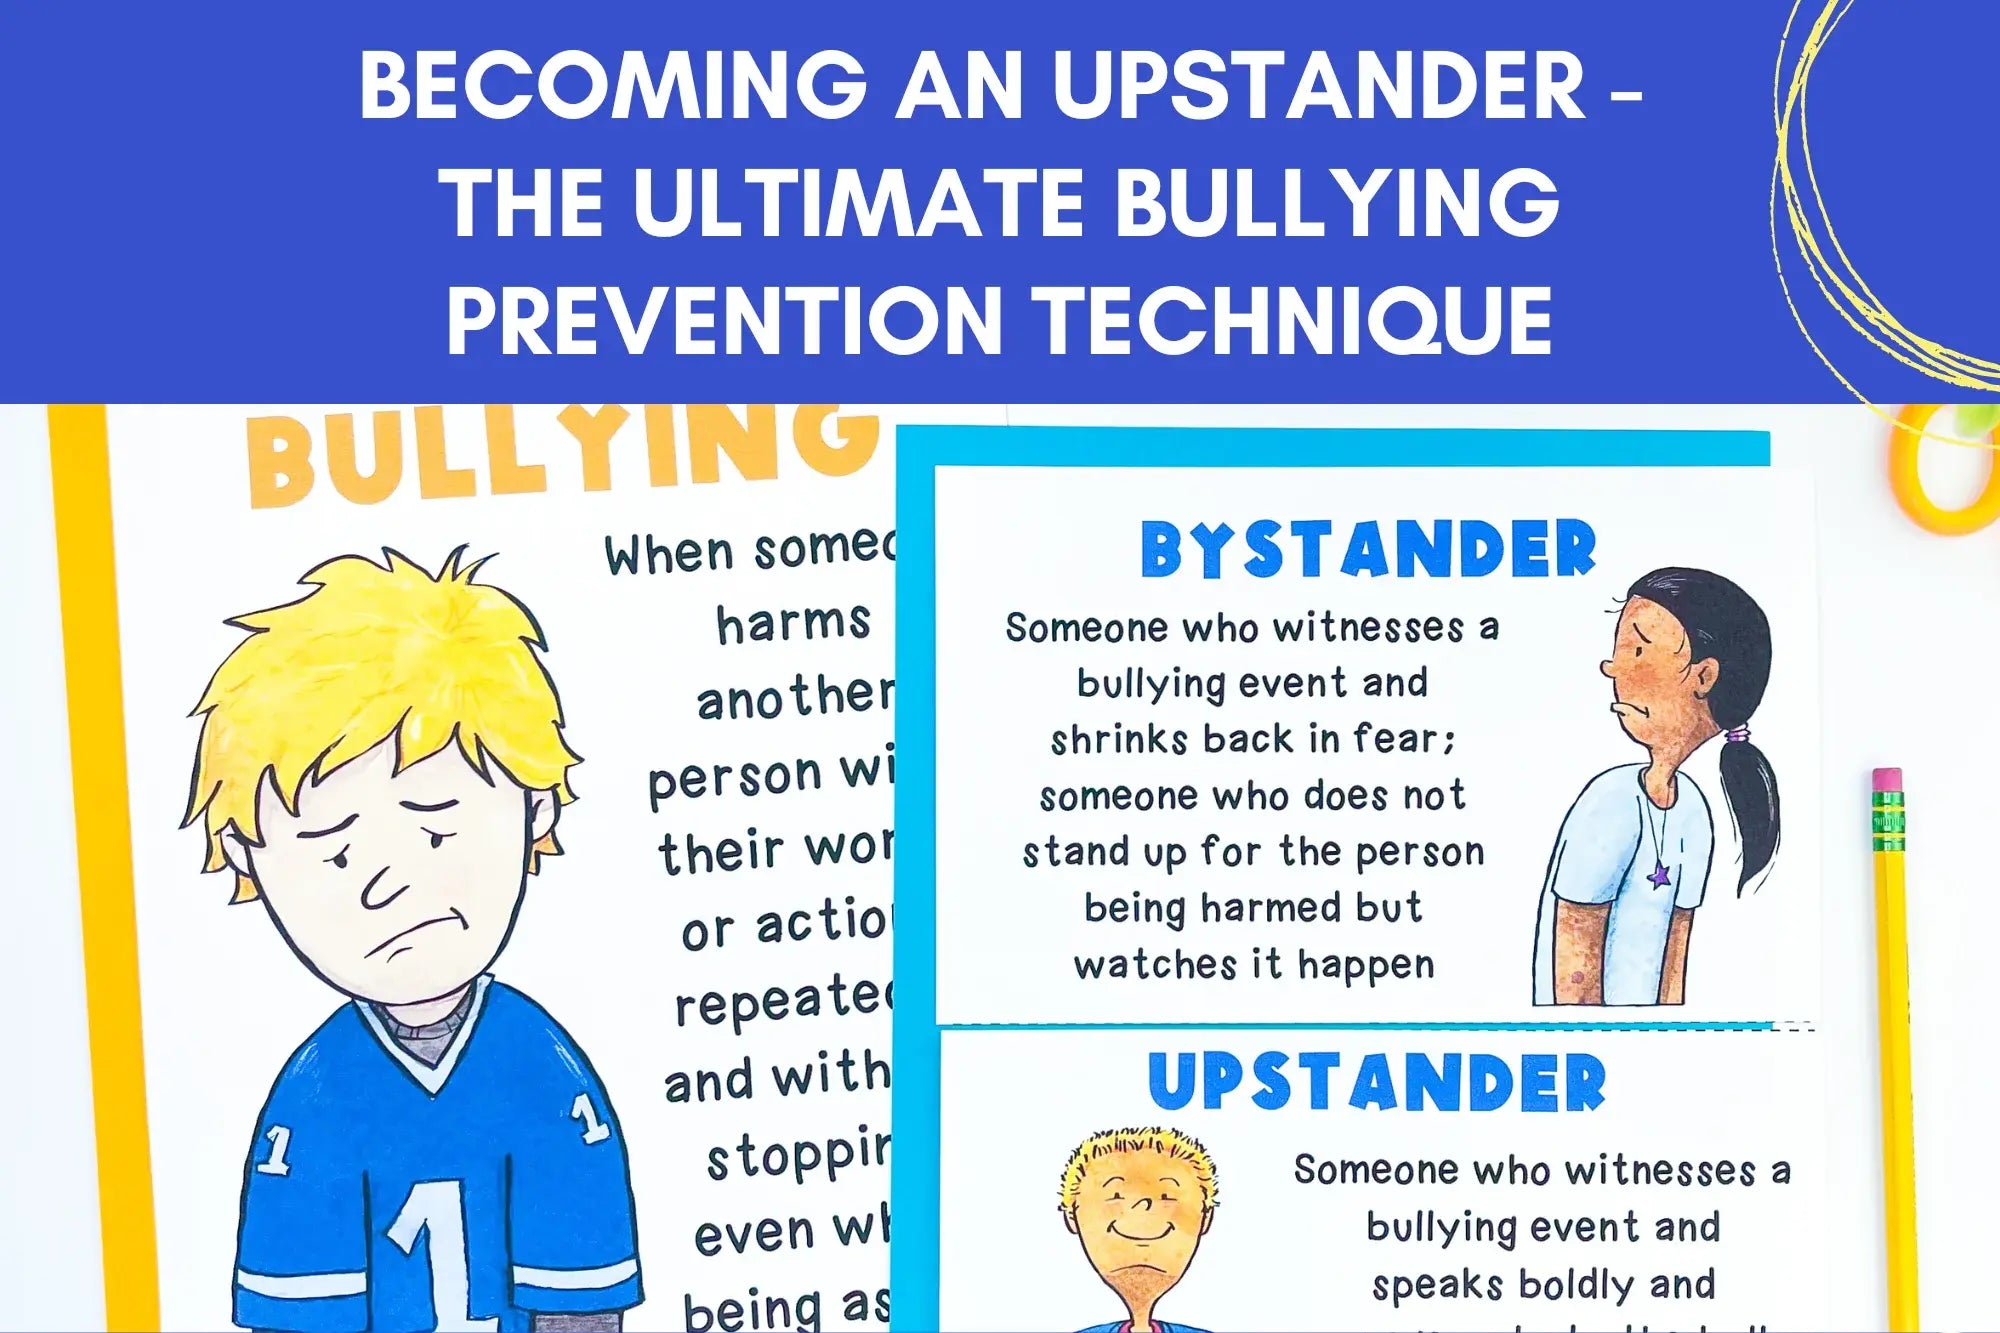 Becoming an Upstander - The Ultimate Bullying Prevention Technique